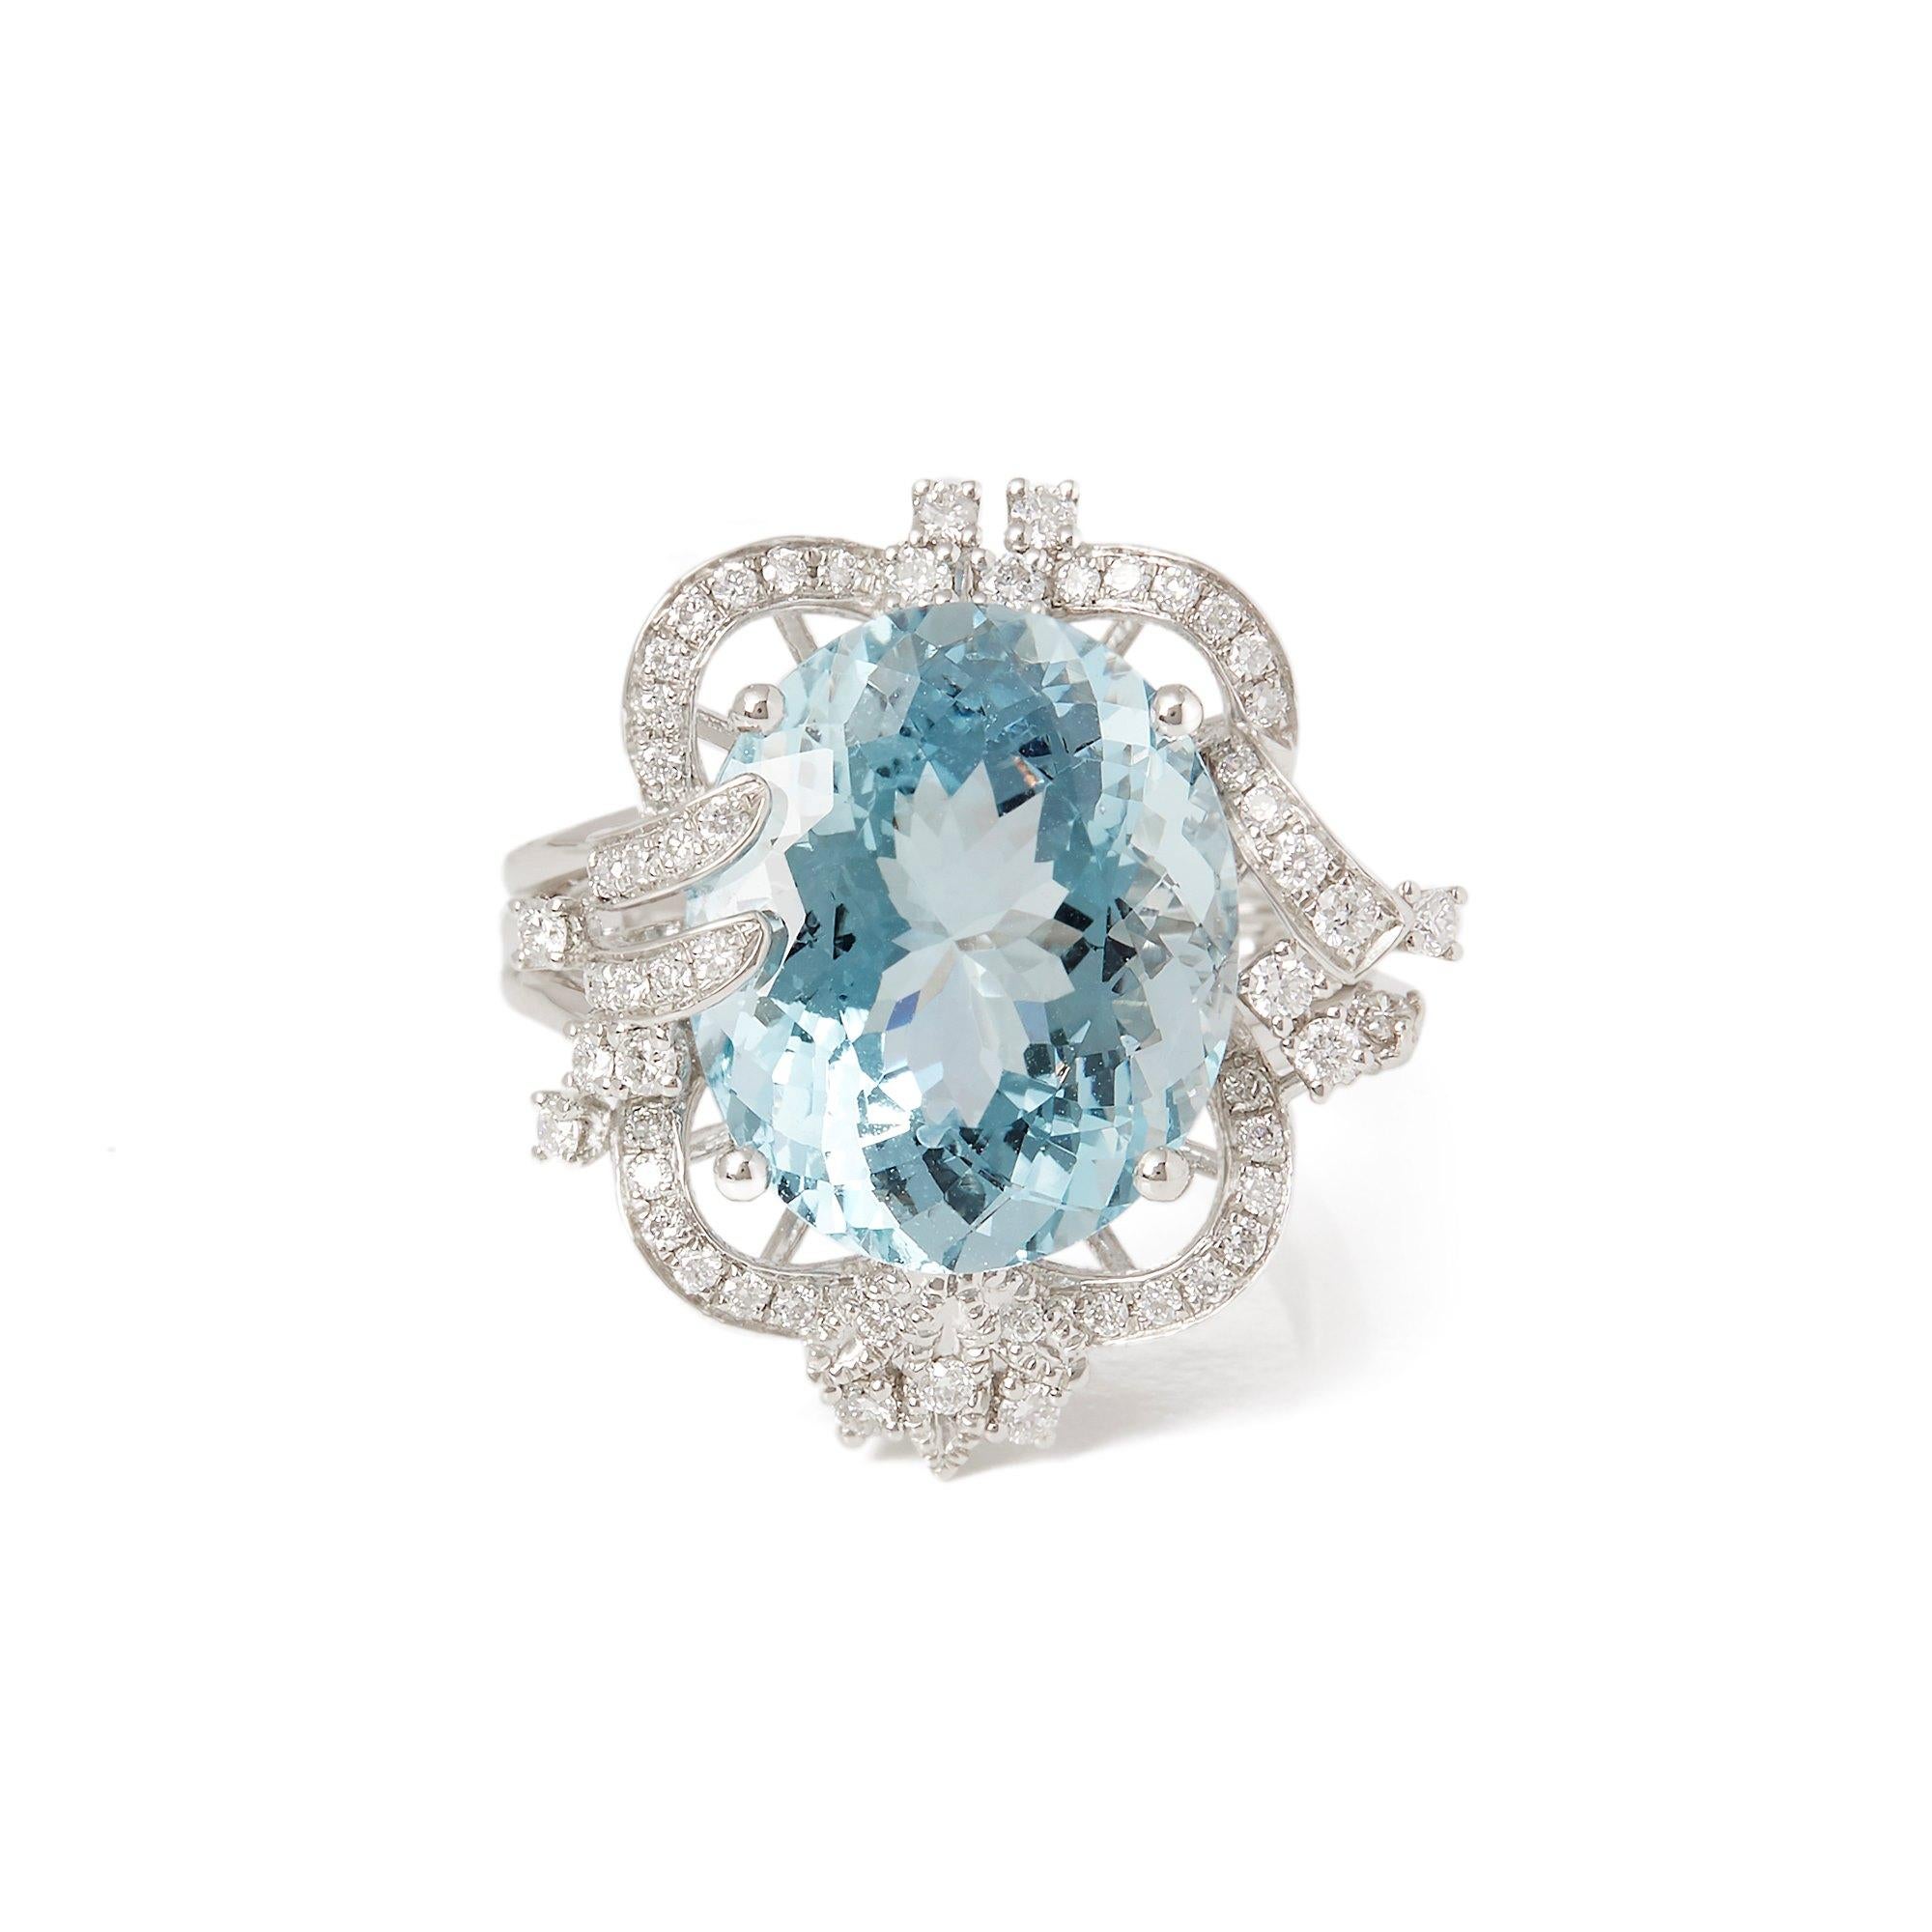 This ring designed by David Jerome is from his private collection and features one oval cut Aquamarine totalling 7.98cts sourced in Brazil. Set with round brilliant cut Diamonds totalling 0.45cts mounted in a platinum setting. Finger size UK N, EU